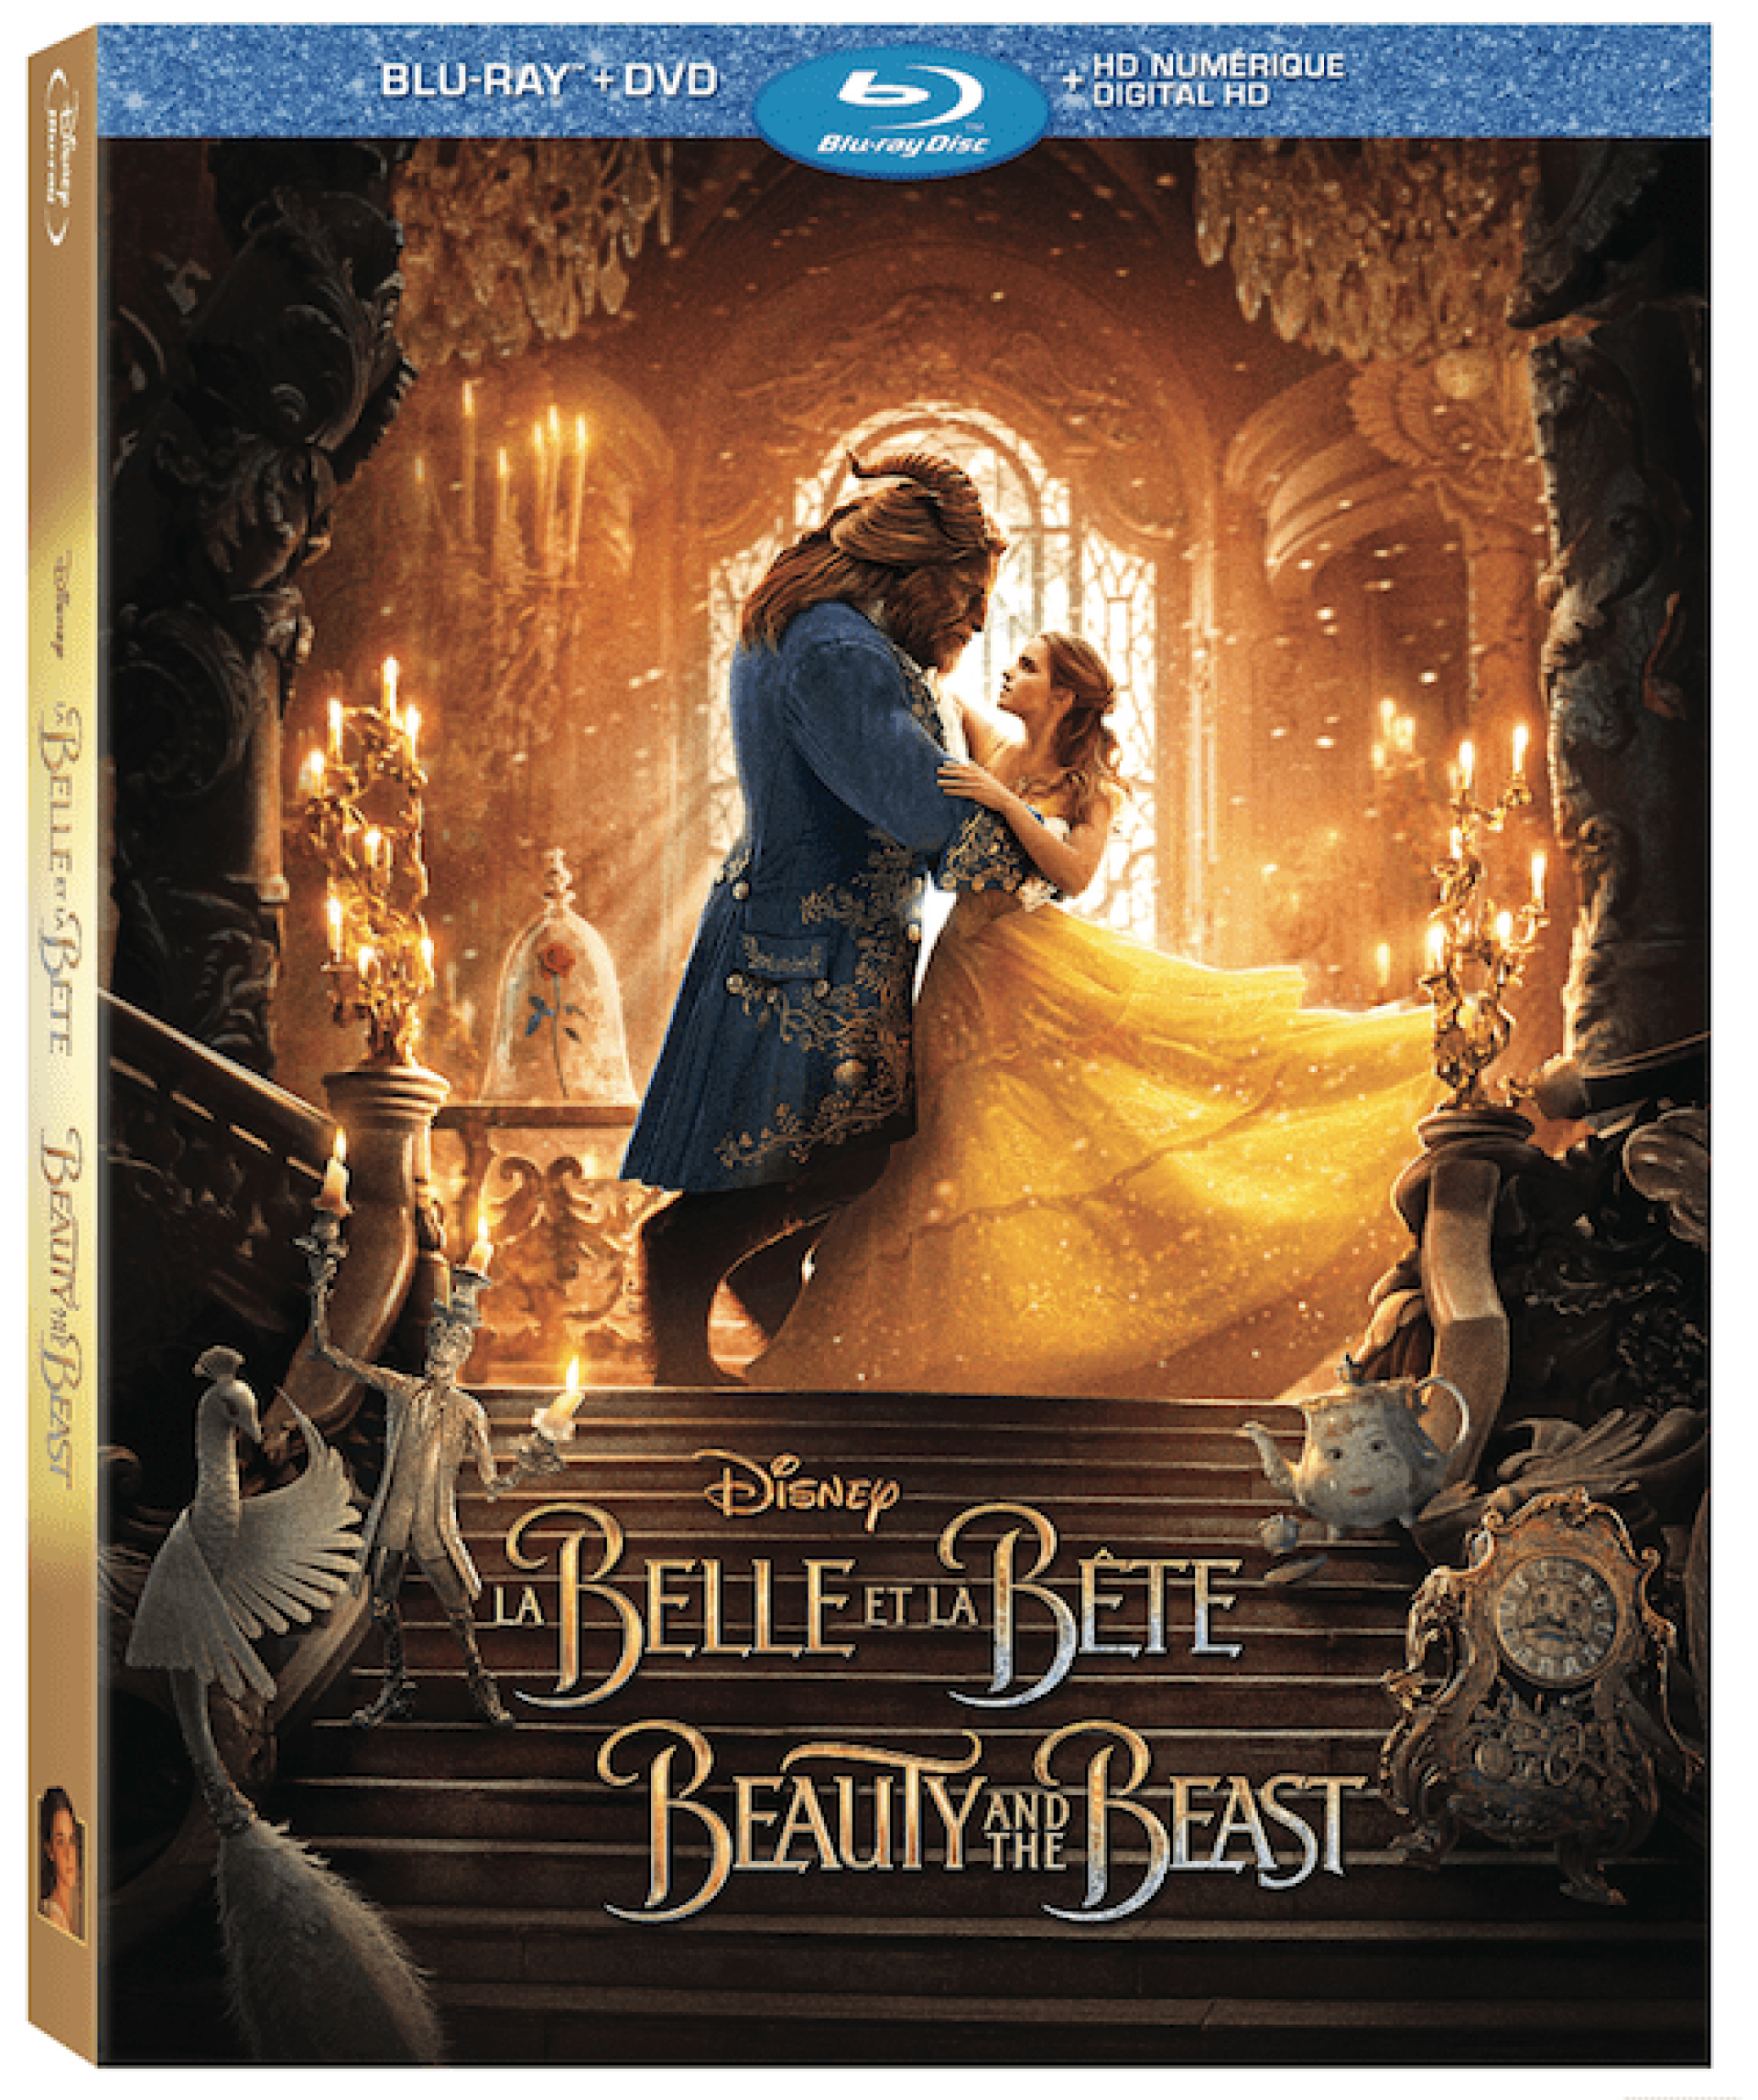 Beauty and the Beast - Pack Shot (Bilingual)